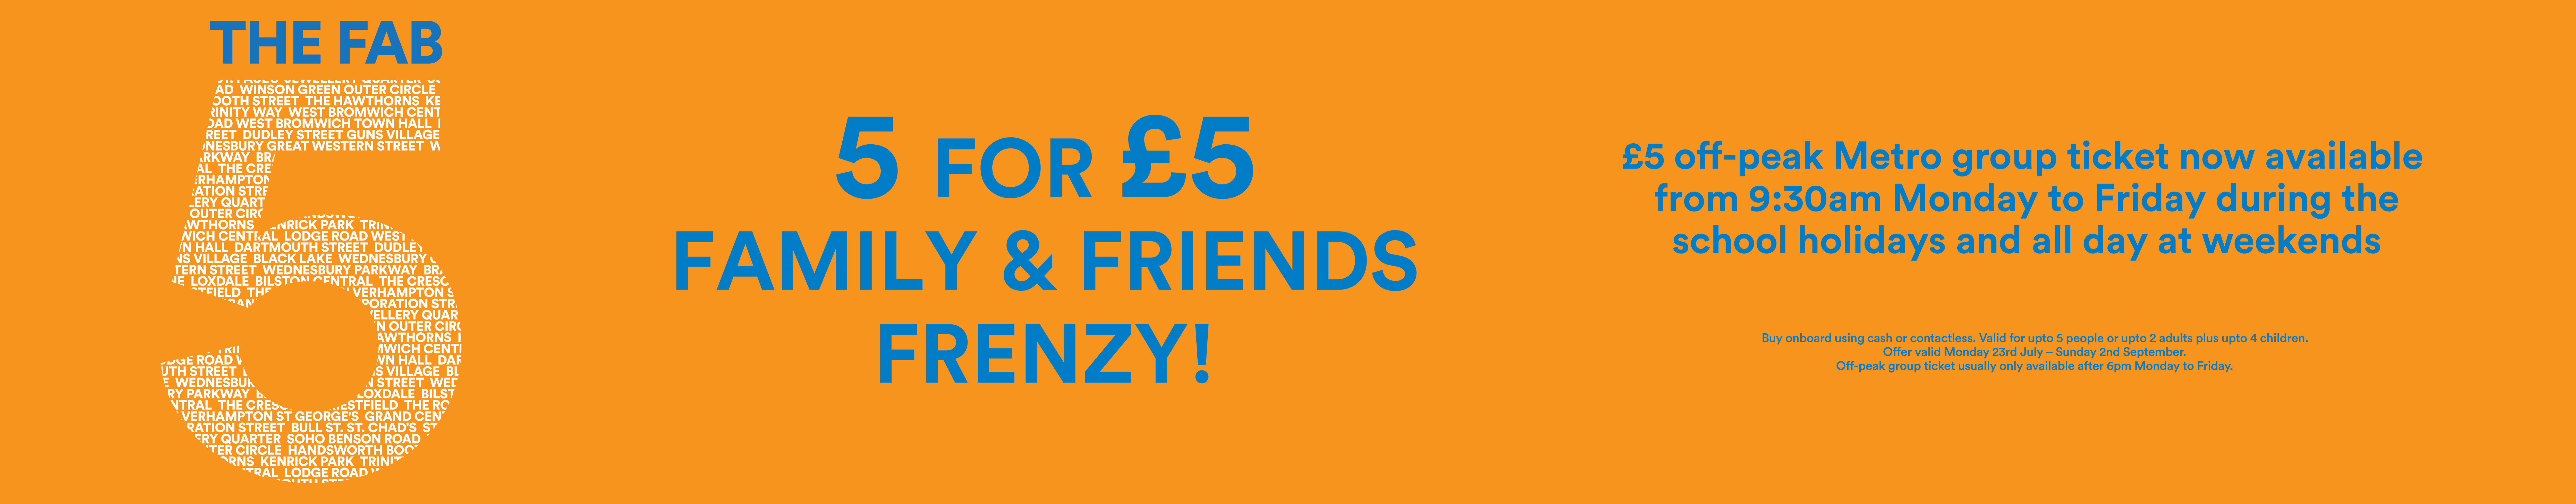 The Fab 5 - 5 for £5 family and friends - £5 off-peak Metro group ticket now available from 9:30am Monday to Friday during the school holidays and all day at weekends